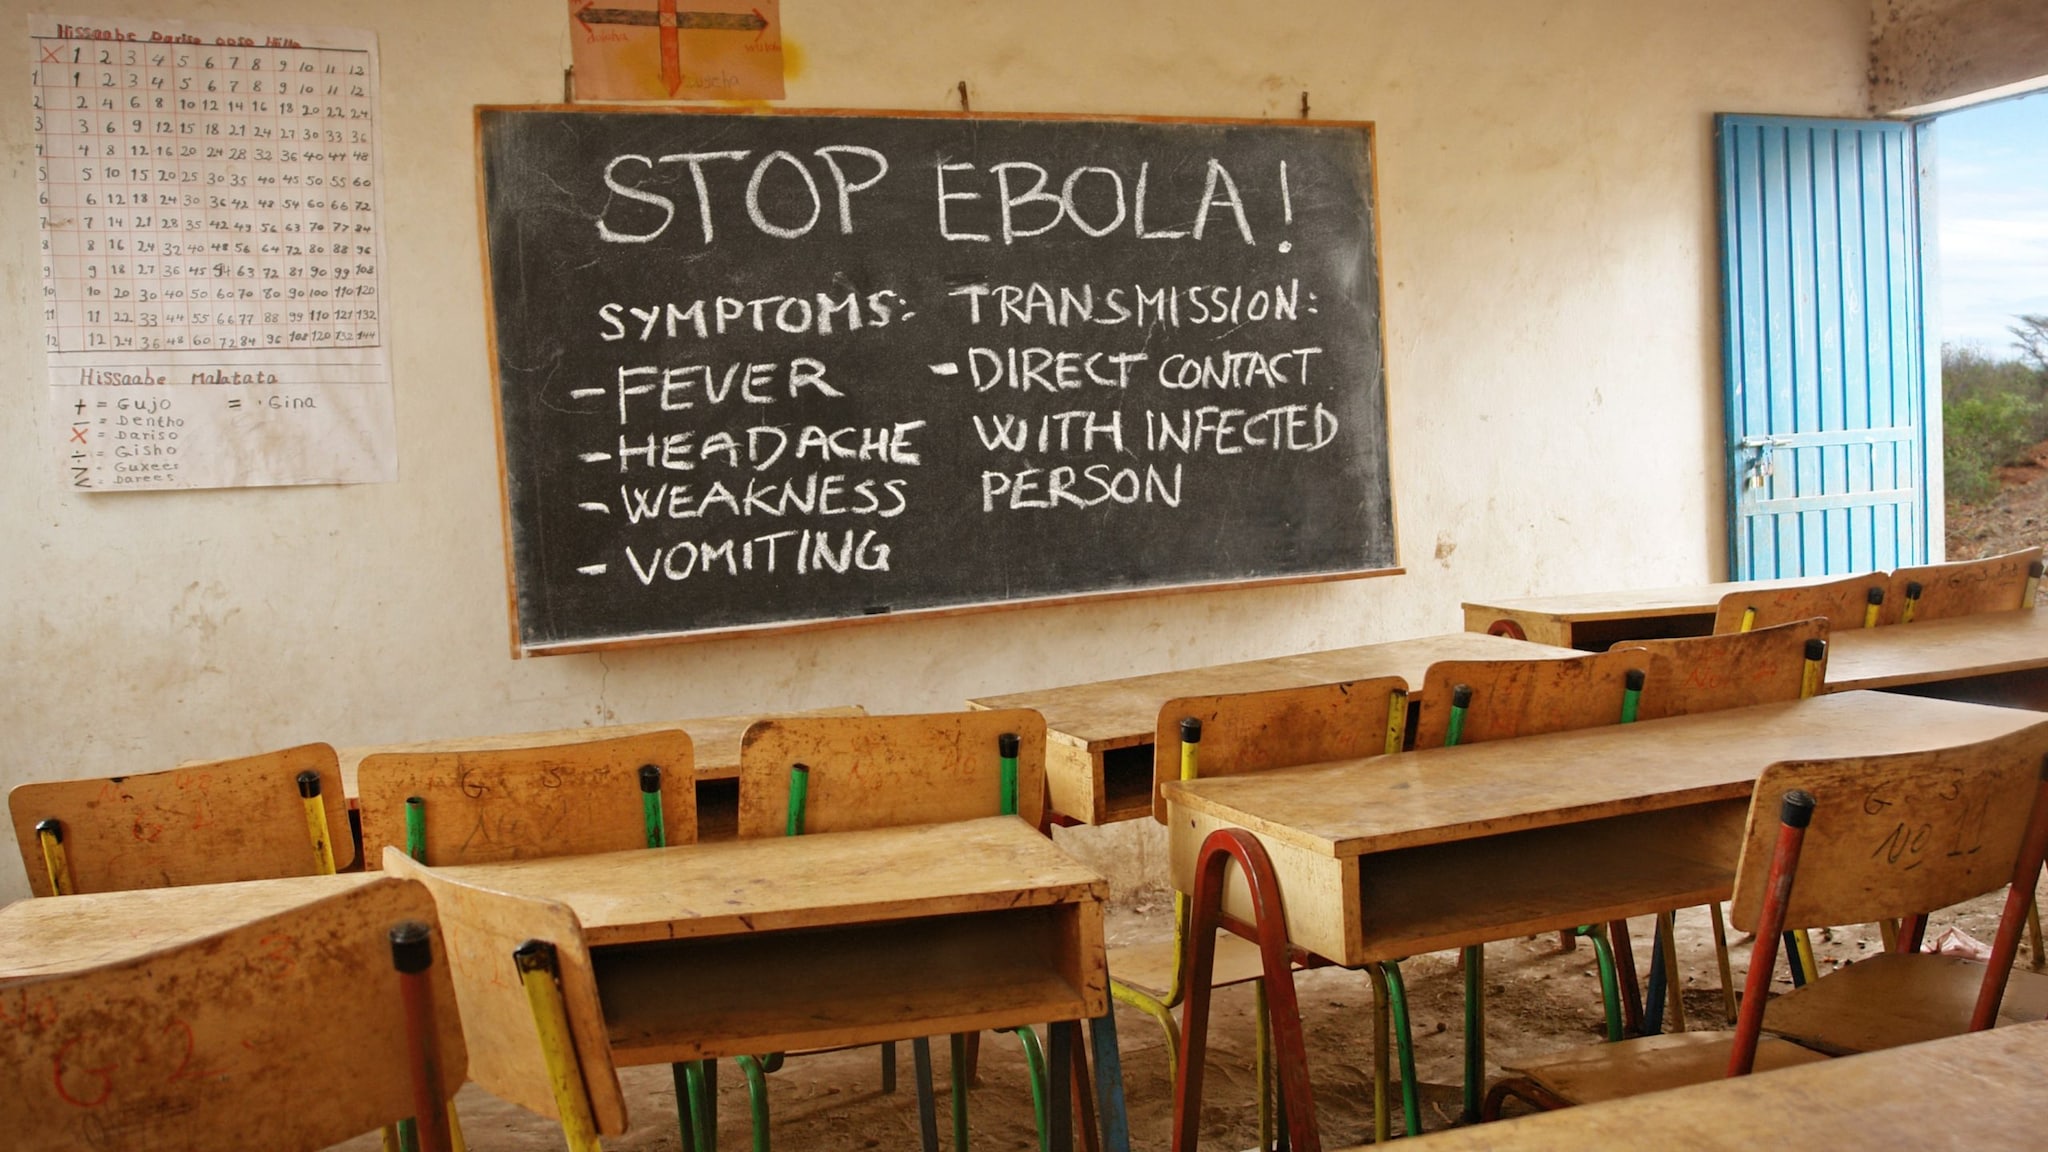 An empty classroom with a blackboard saying "Stop Ebola" and a description of signs and symptoms